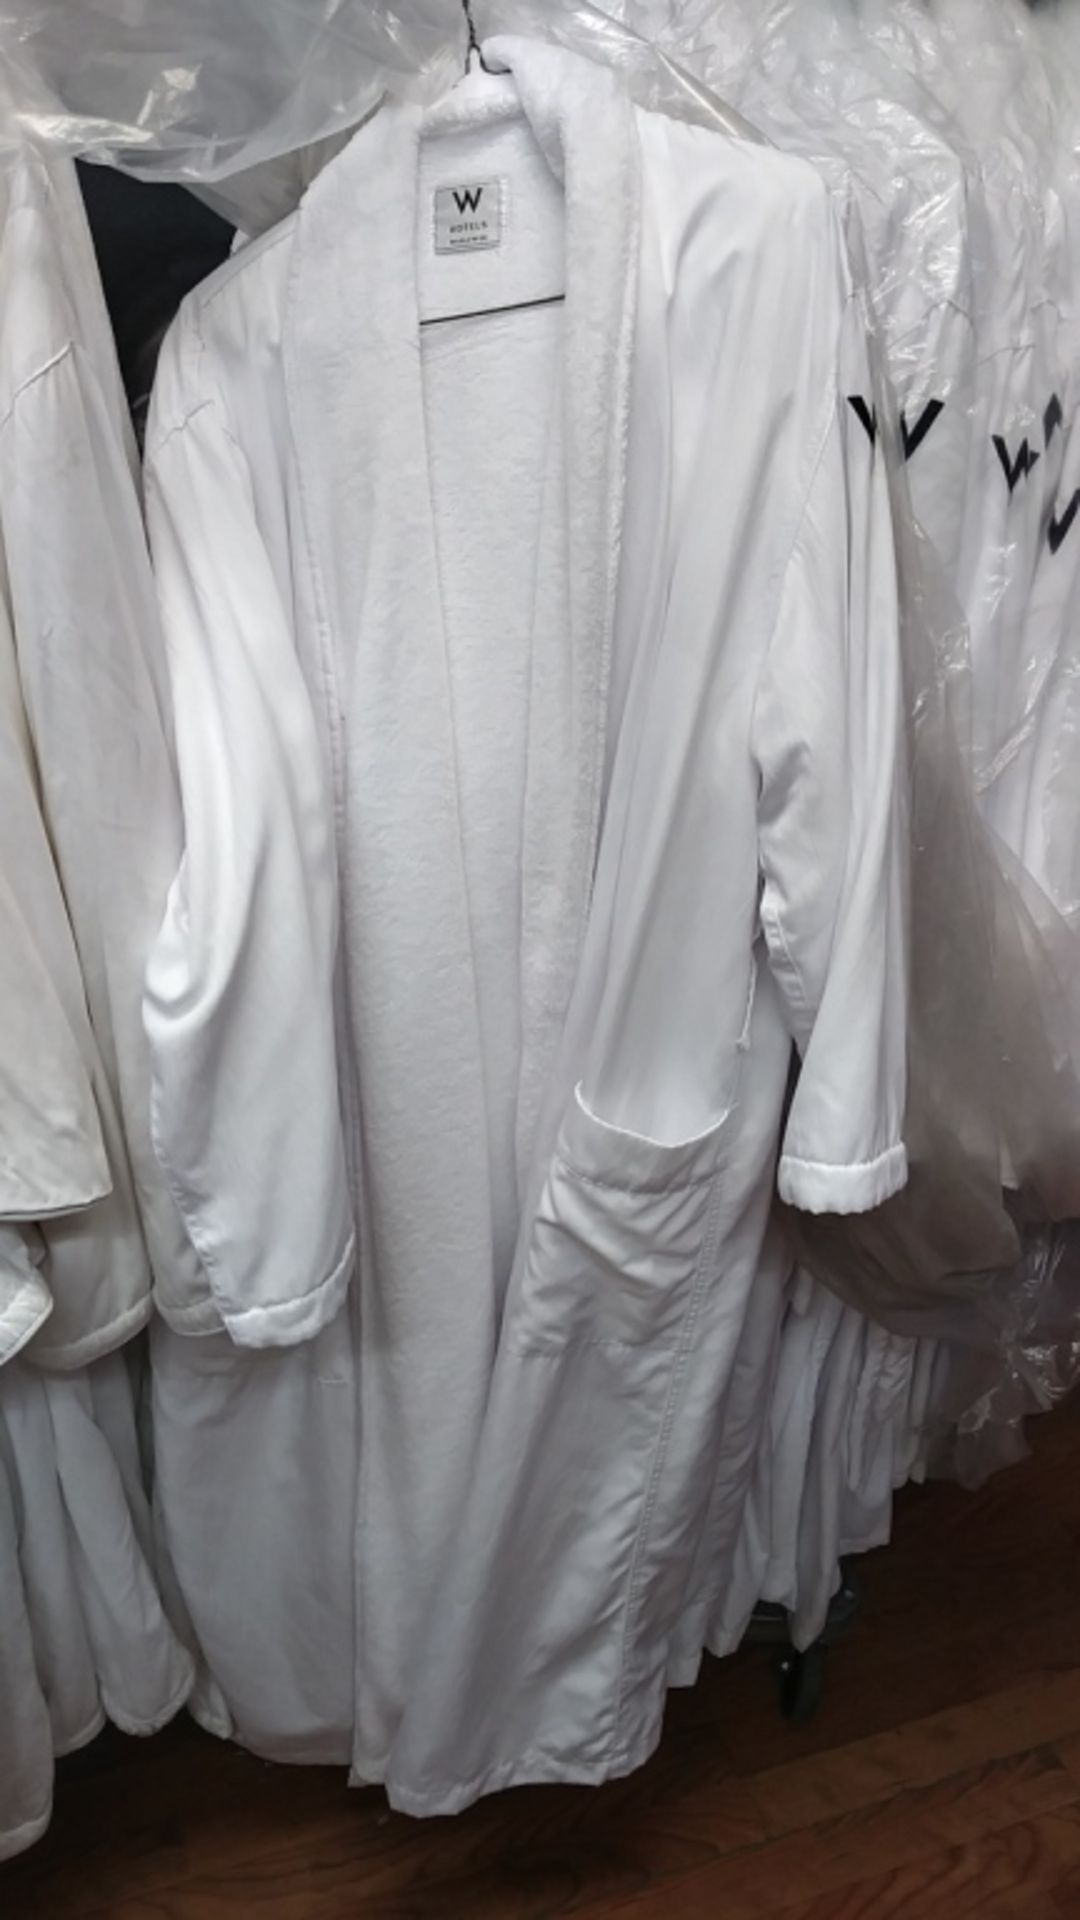 Used White Bath Robes - Assorted Sizes (INCLUDES 20 ROBES)